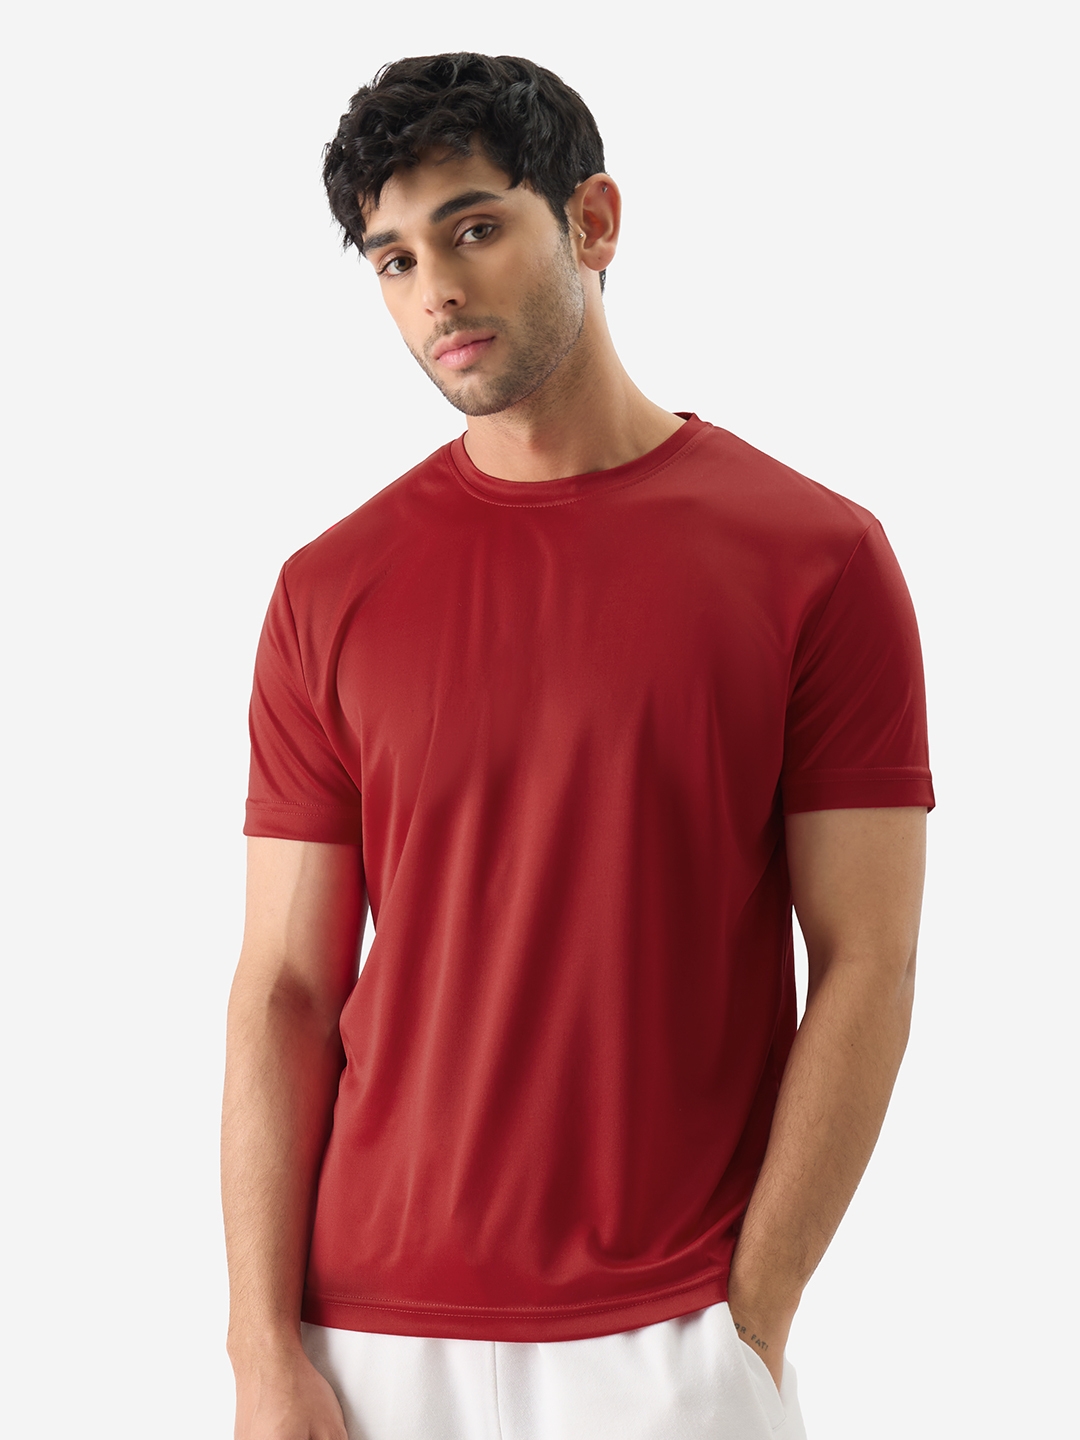 The Souled Store | Men's Solids: Red T-Shirt